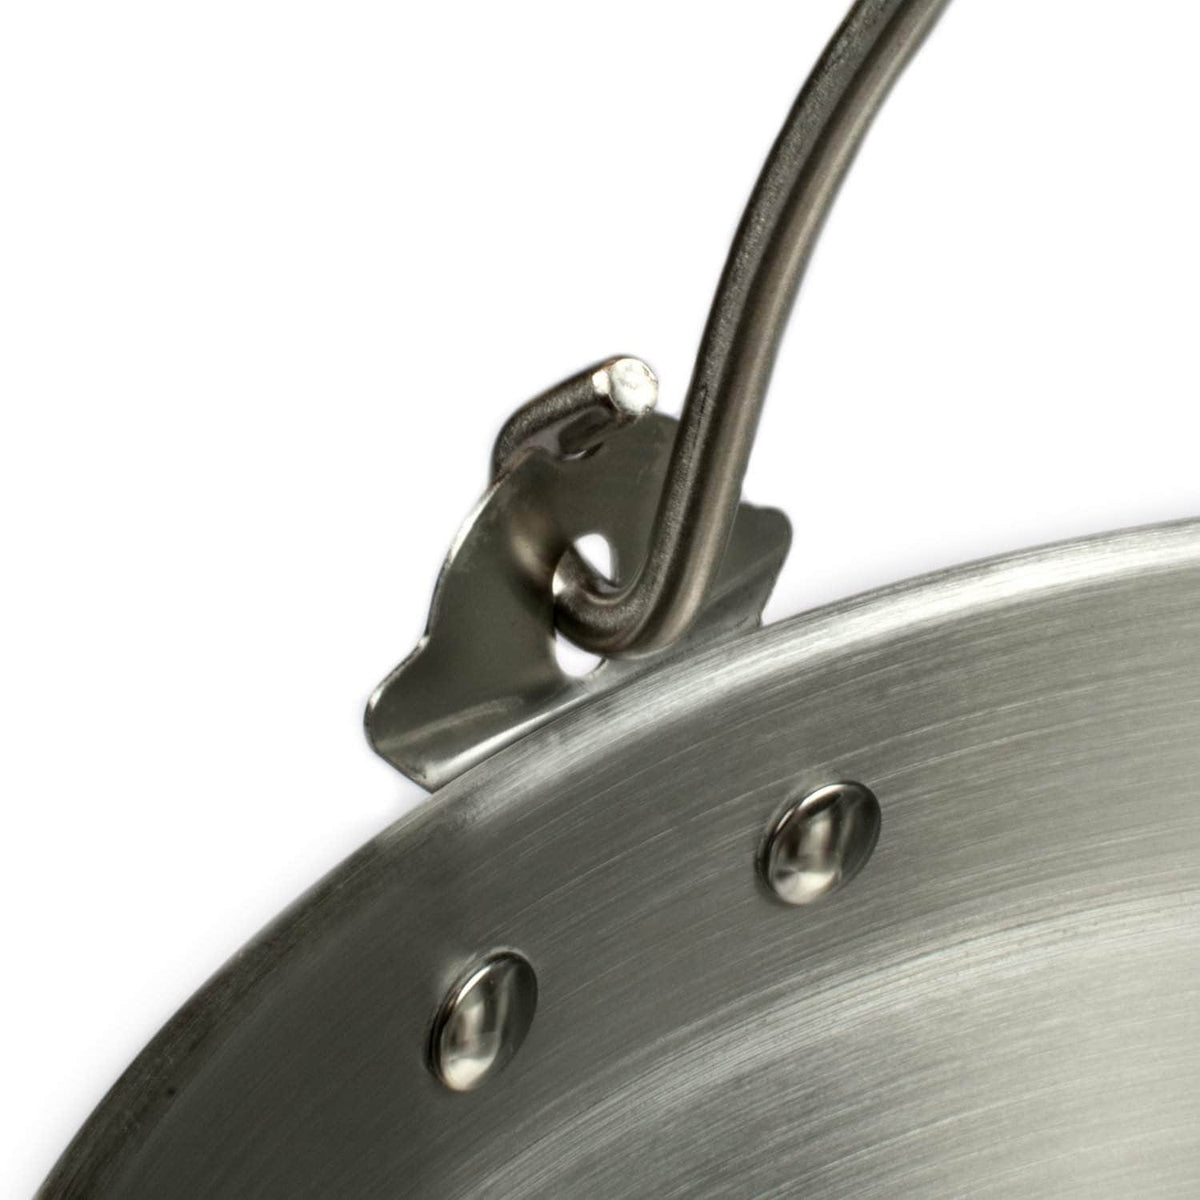 *New* Stainless steel Maslin pan